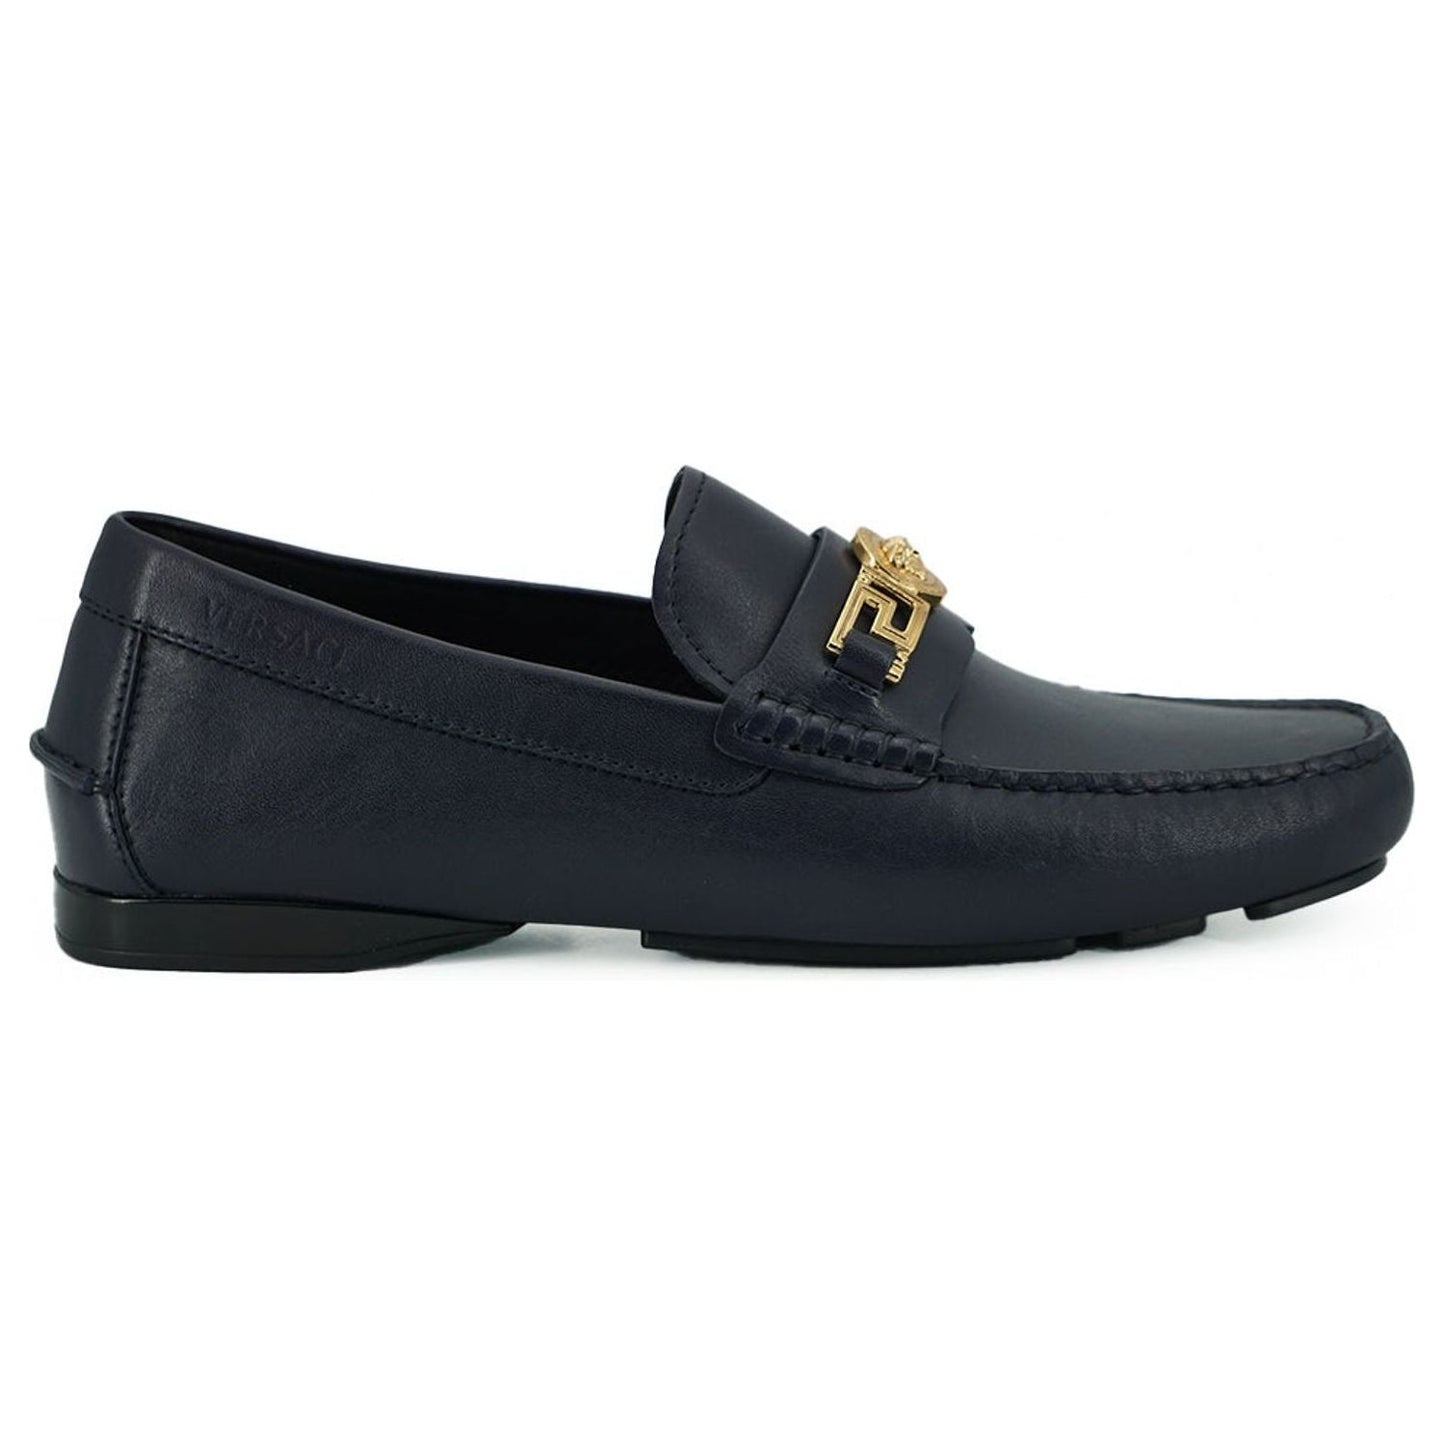 Versace | Navy Blue Calf Leather Loafers Shoes  | McRichard Designer Brands